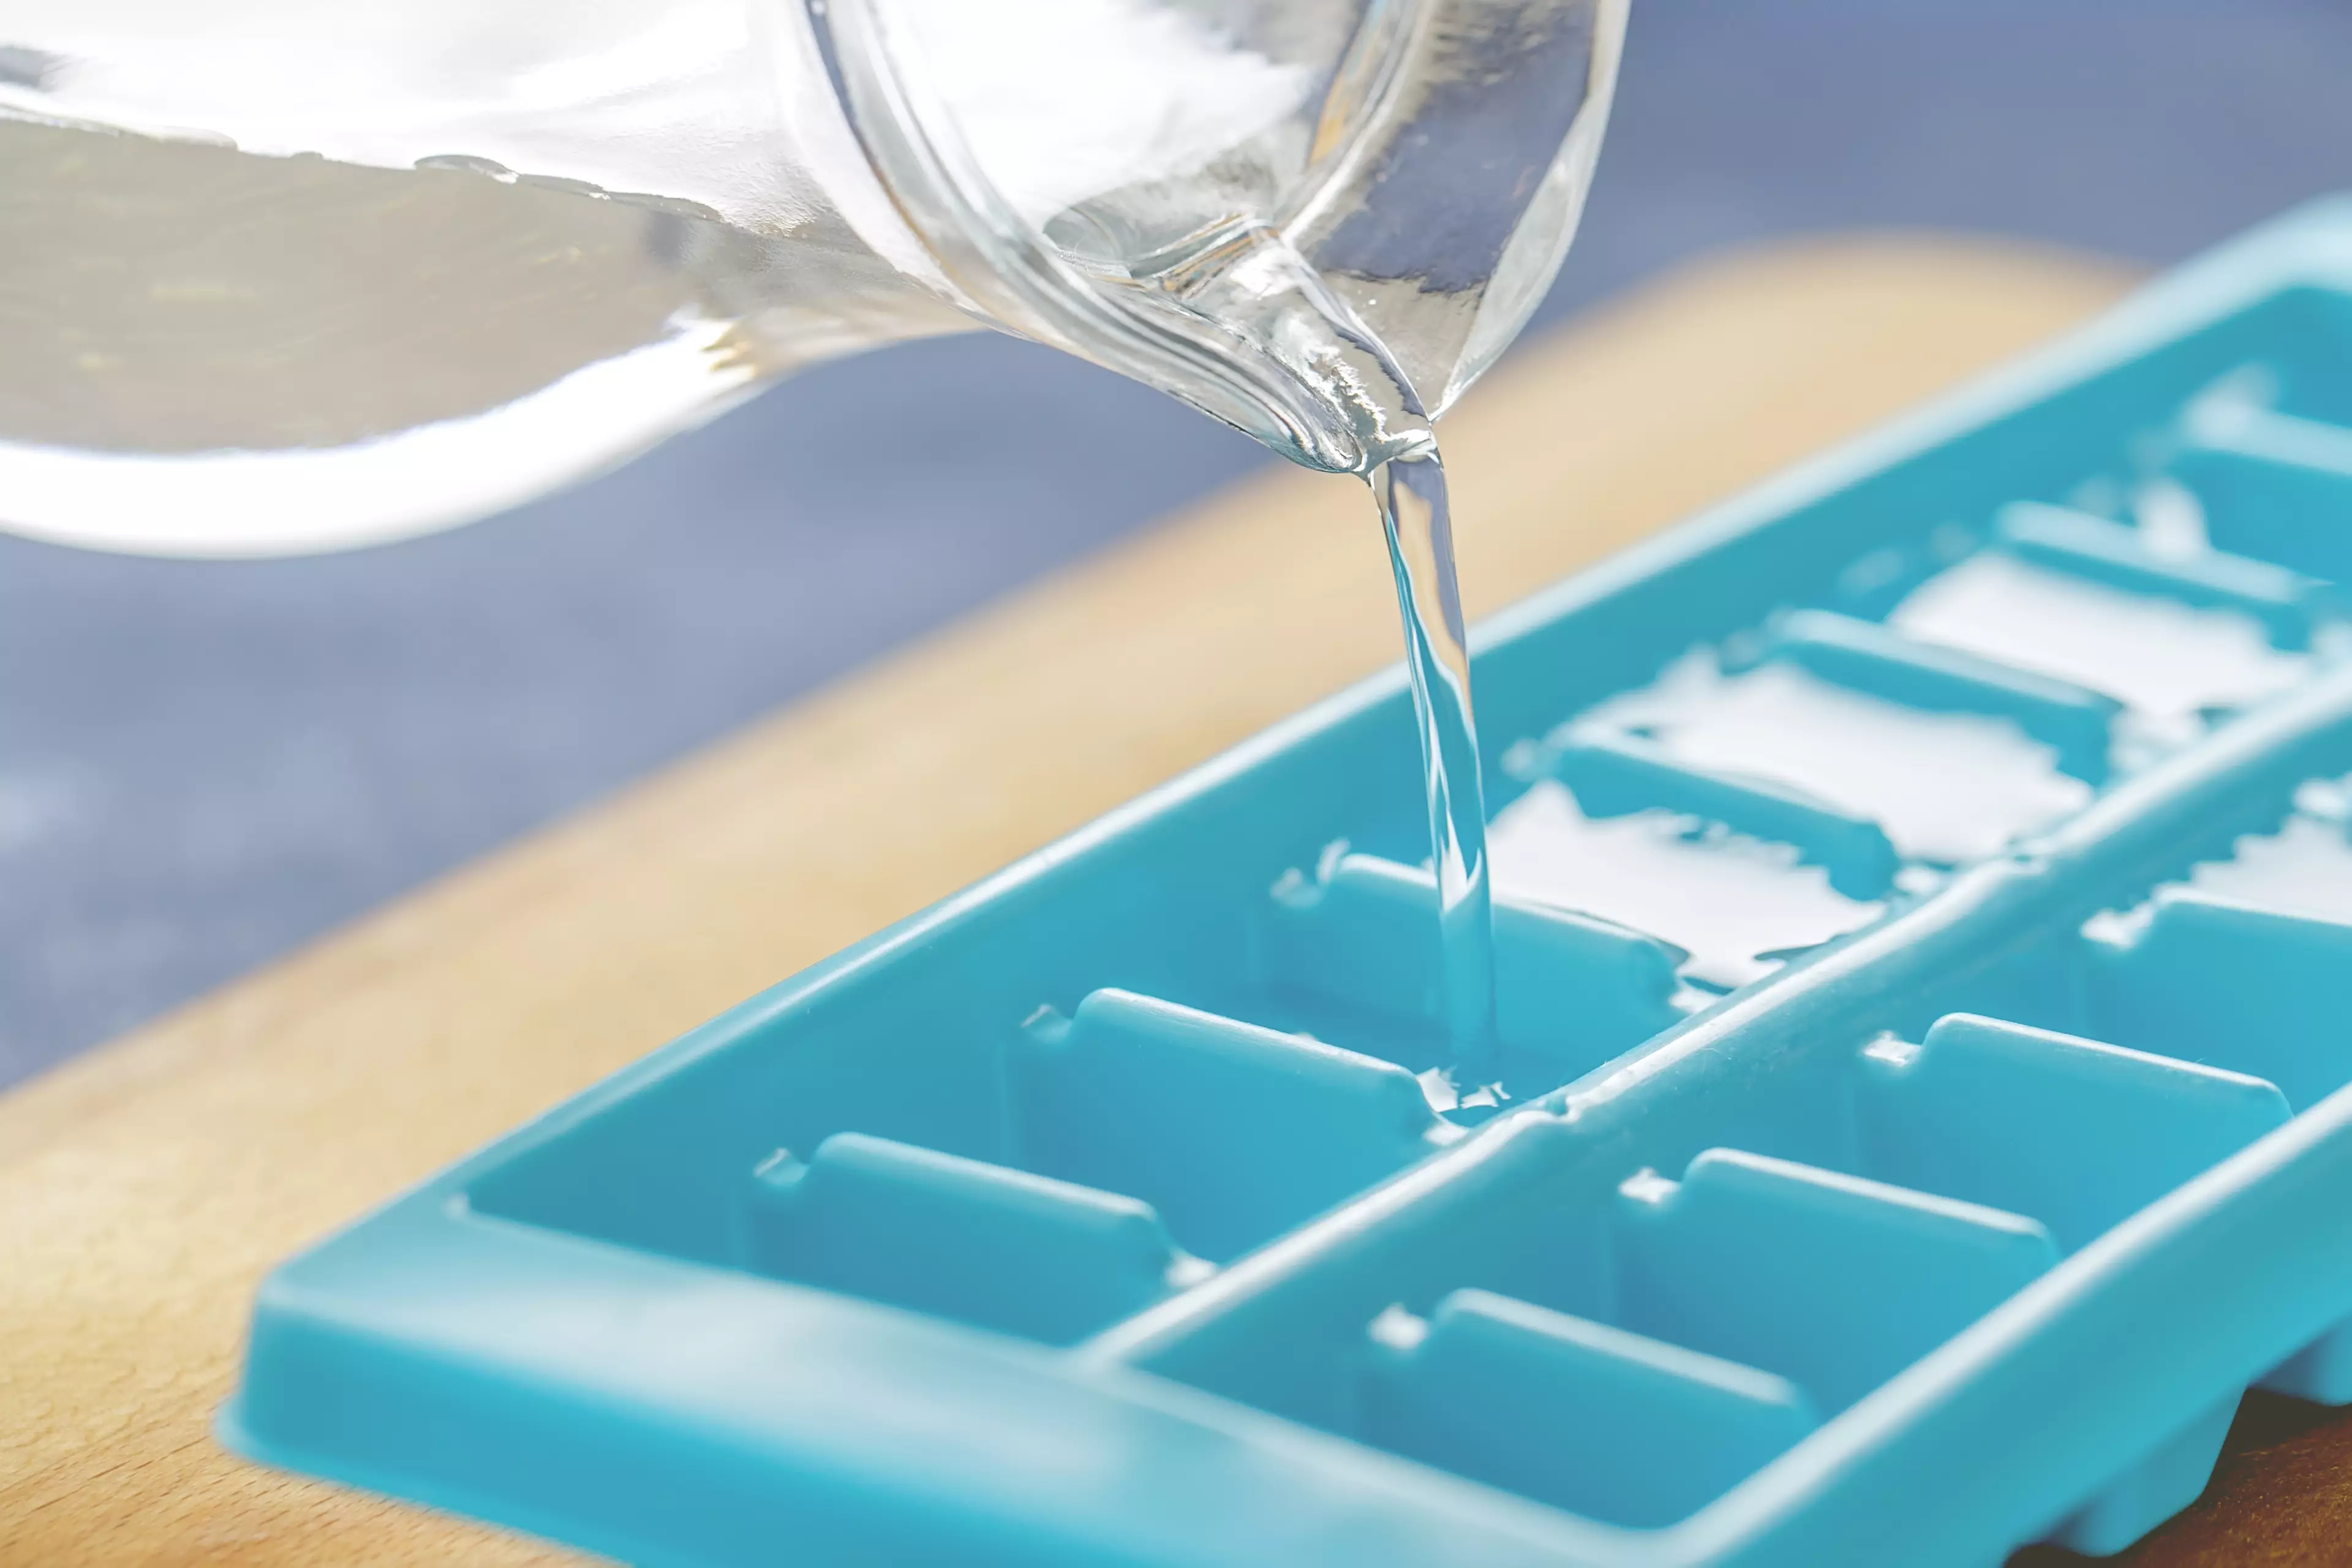 Do your ice cube trays have the flat areas? (